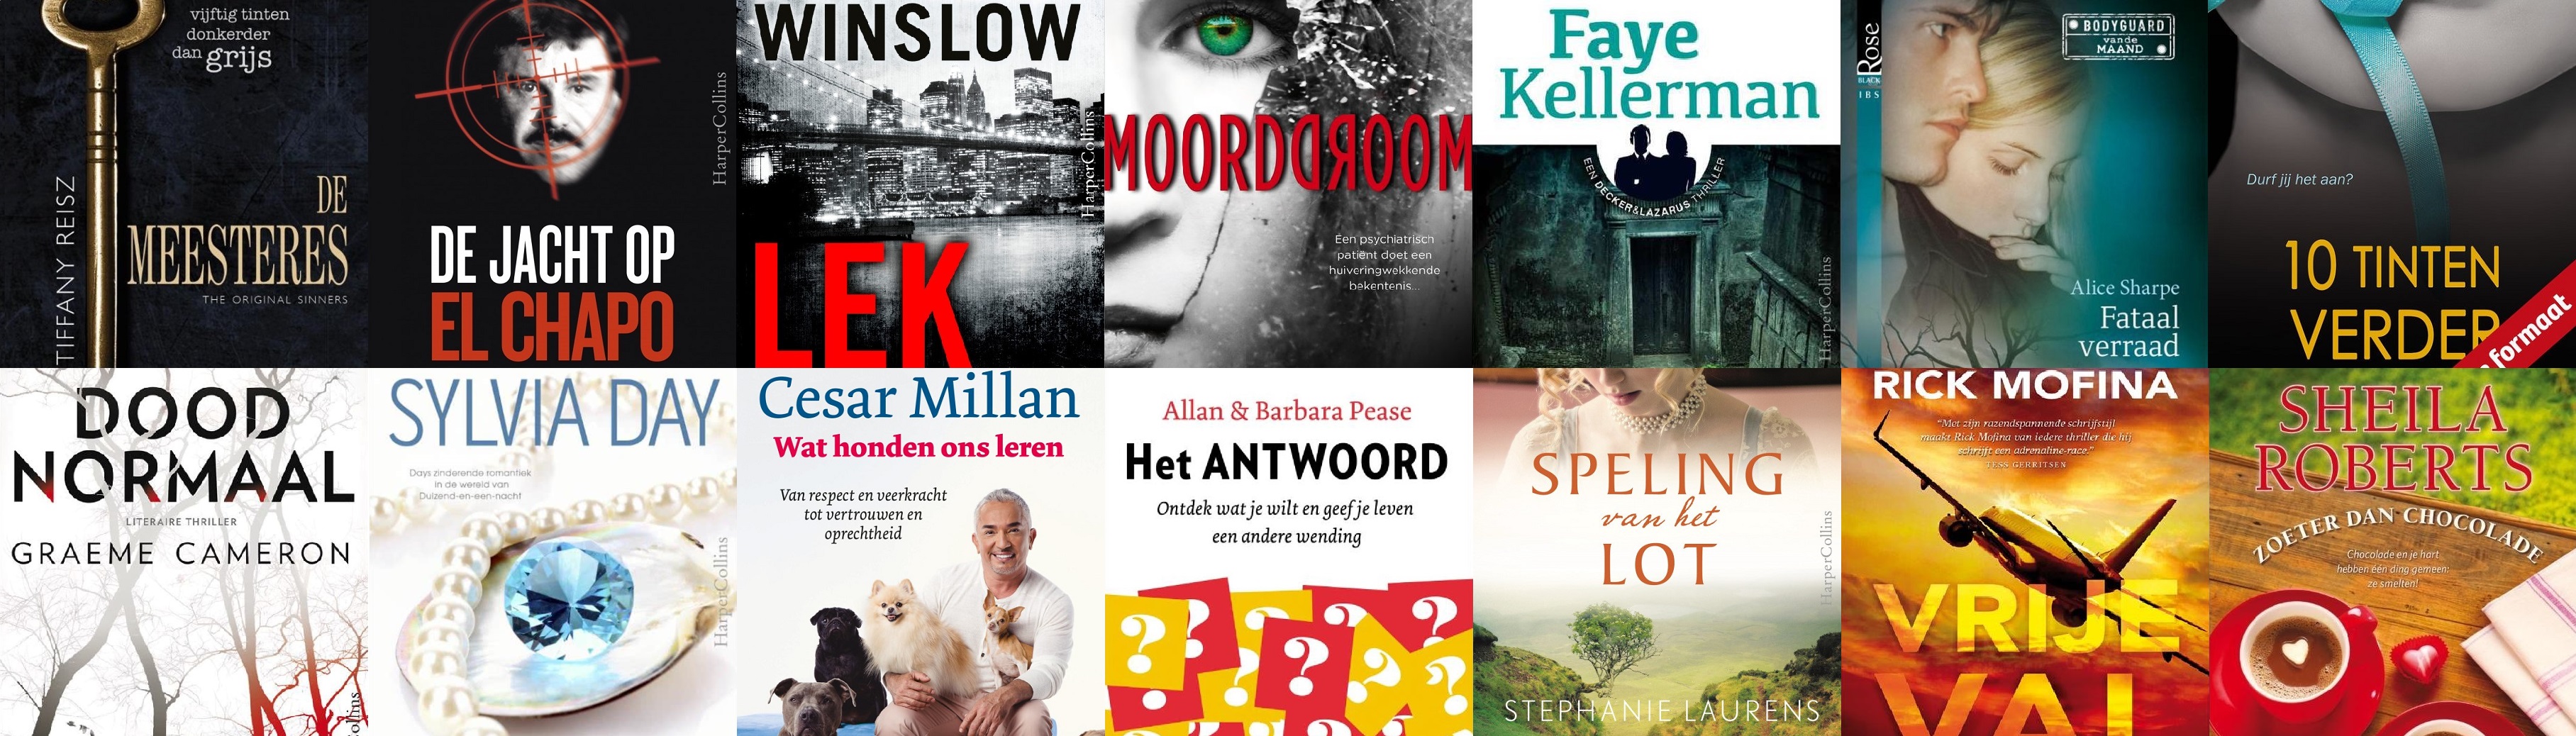 harpercollins-harlequin-holland-covers-collage2